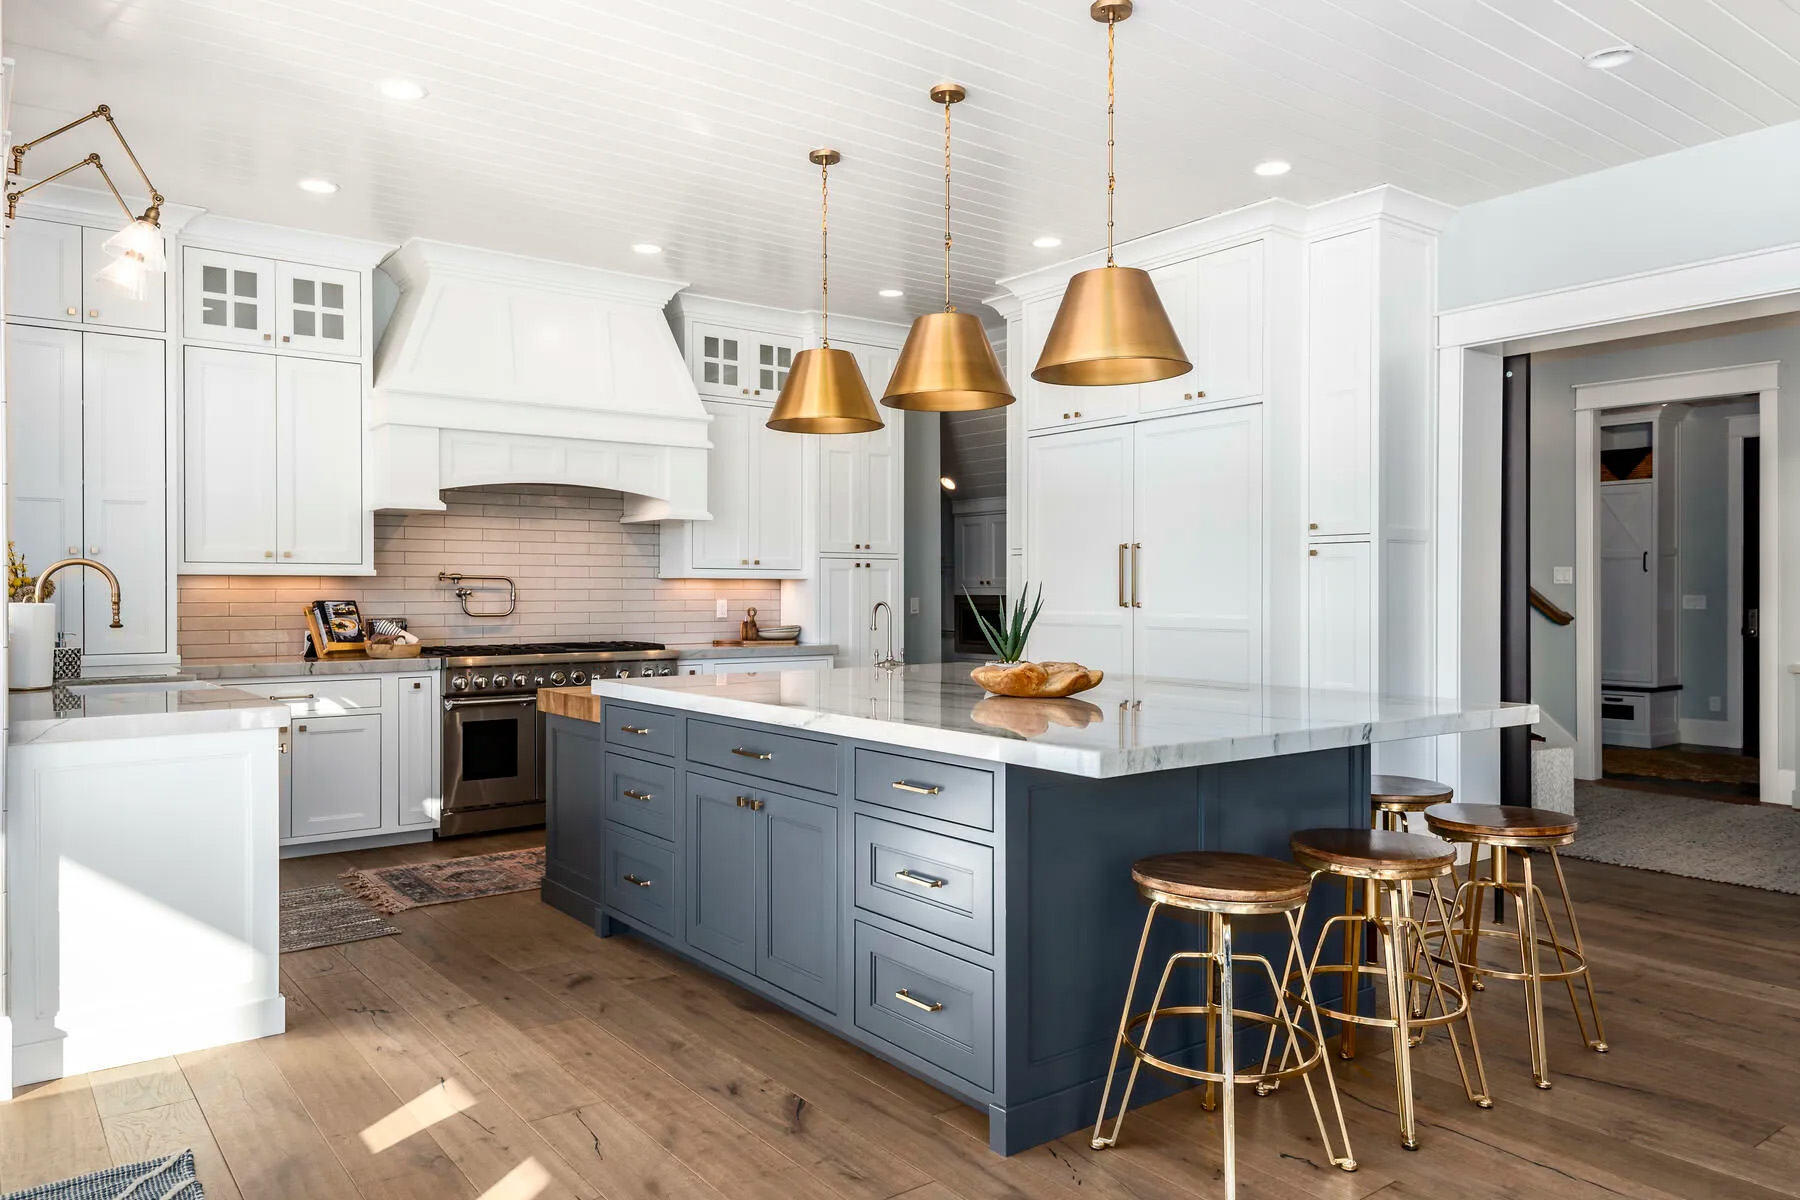 Stunning kitchen design including a blue island, marble countertops, white wall cabinetry and gold and wooden stools.